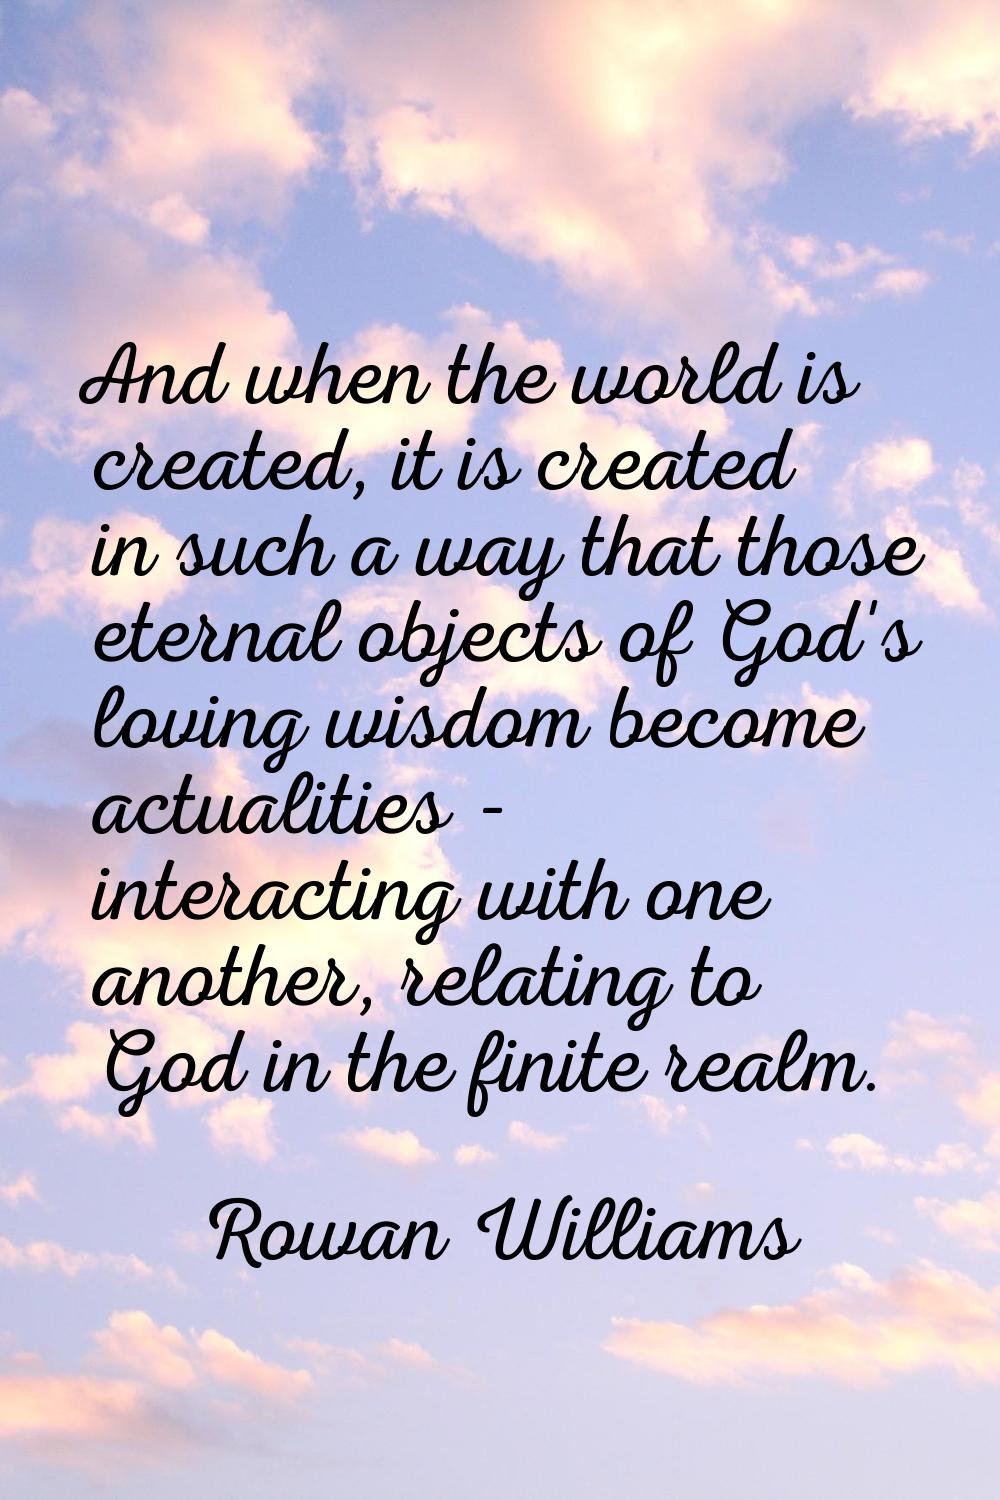 And when the world is created, it is created in such a way that those eternal objects of God's lovi